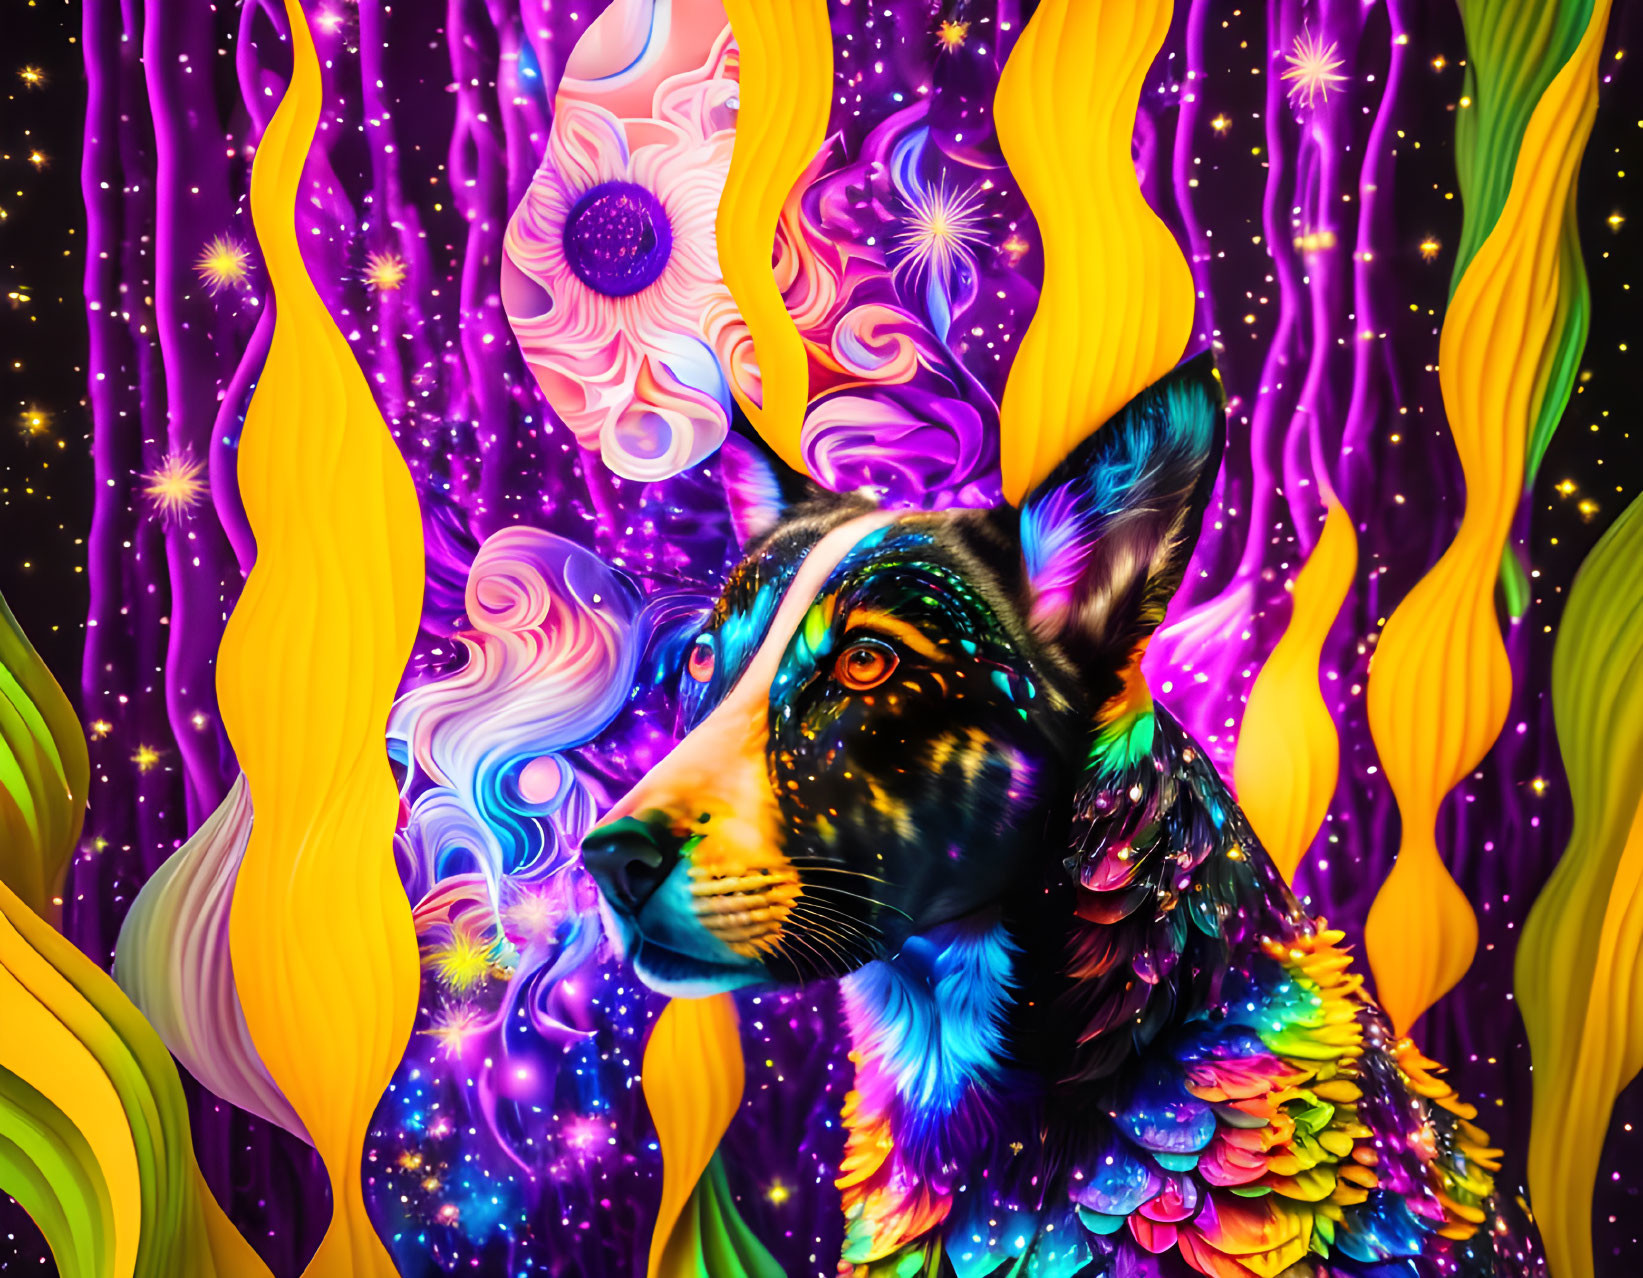 Colorful cosmic dog digital art on psychedelic background